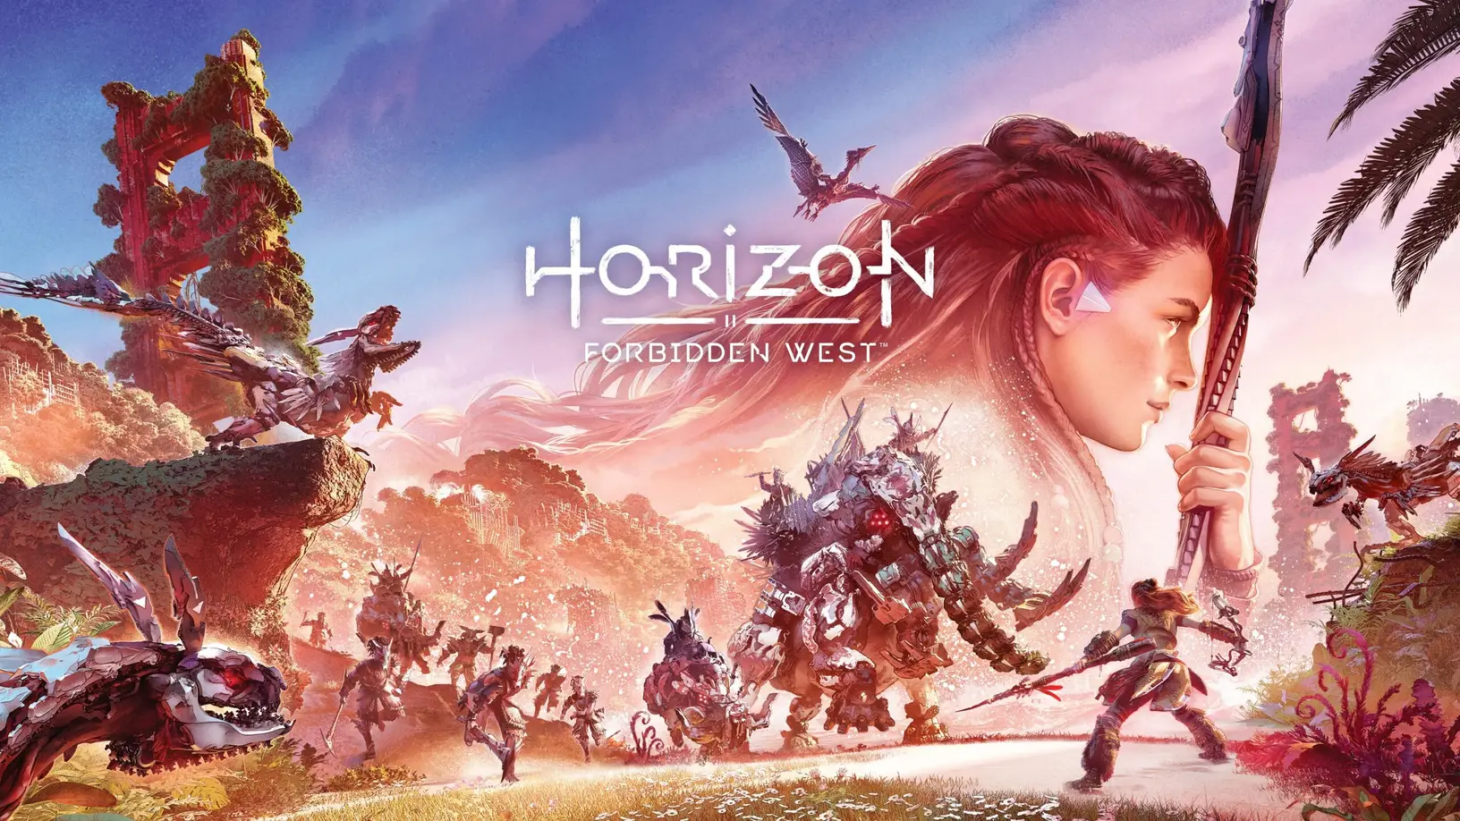 Horizon Forbidden West Will Now Have A Free Upgrade Between The PlayStation 4 And PlayStation 5 Versions